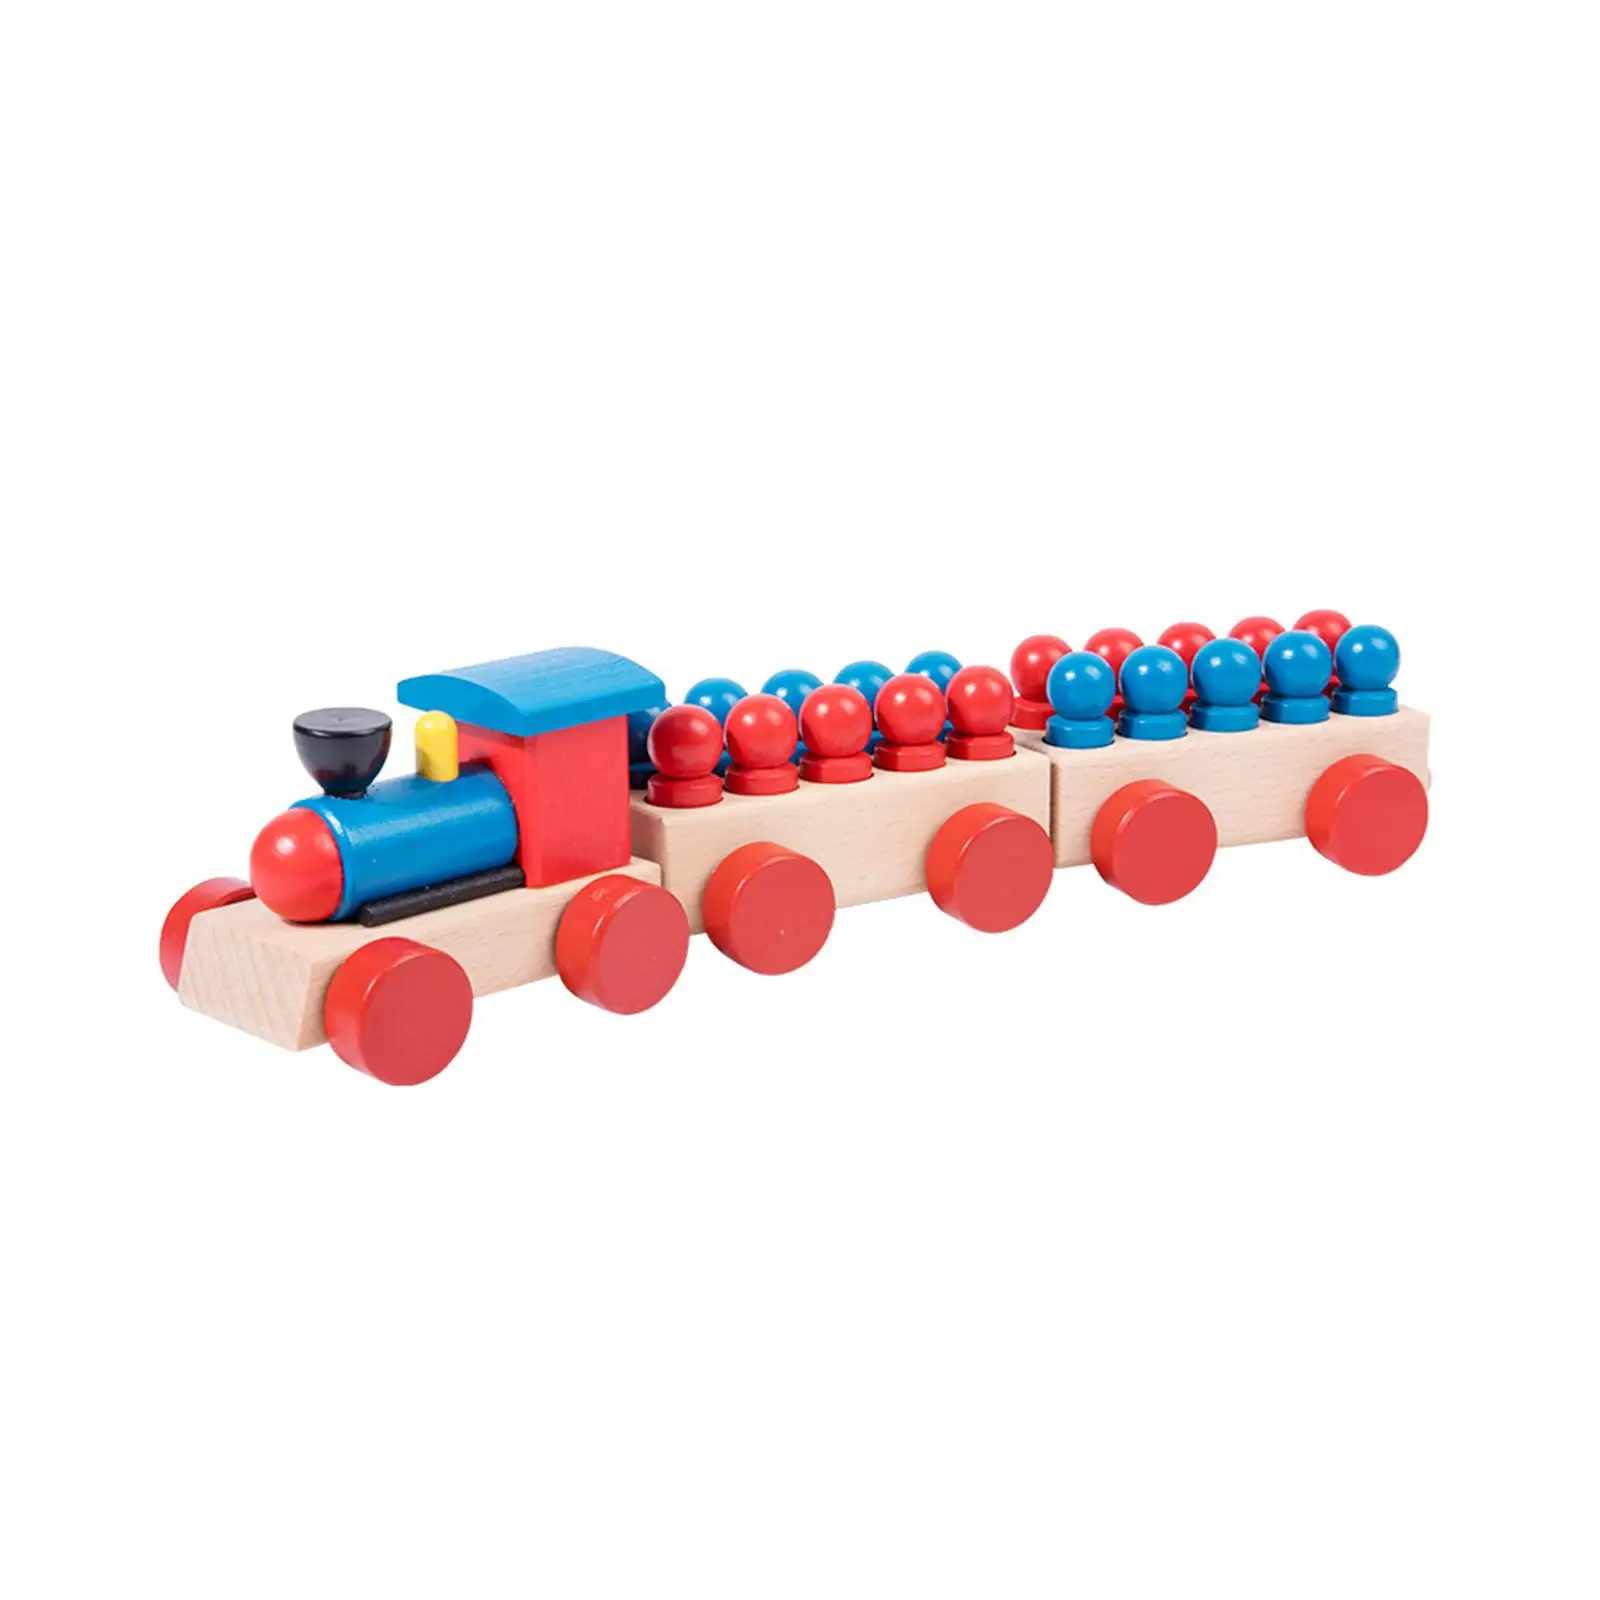 Wooden Stacking Train Preschool Educational Toys Problem Solving Montessori Math Toys Teaching Aids for Baby Kids 1 2 3 Year Old